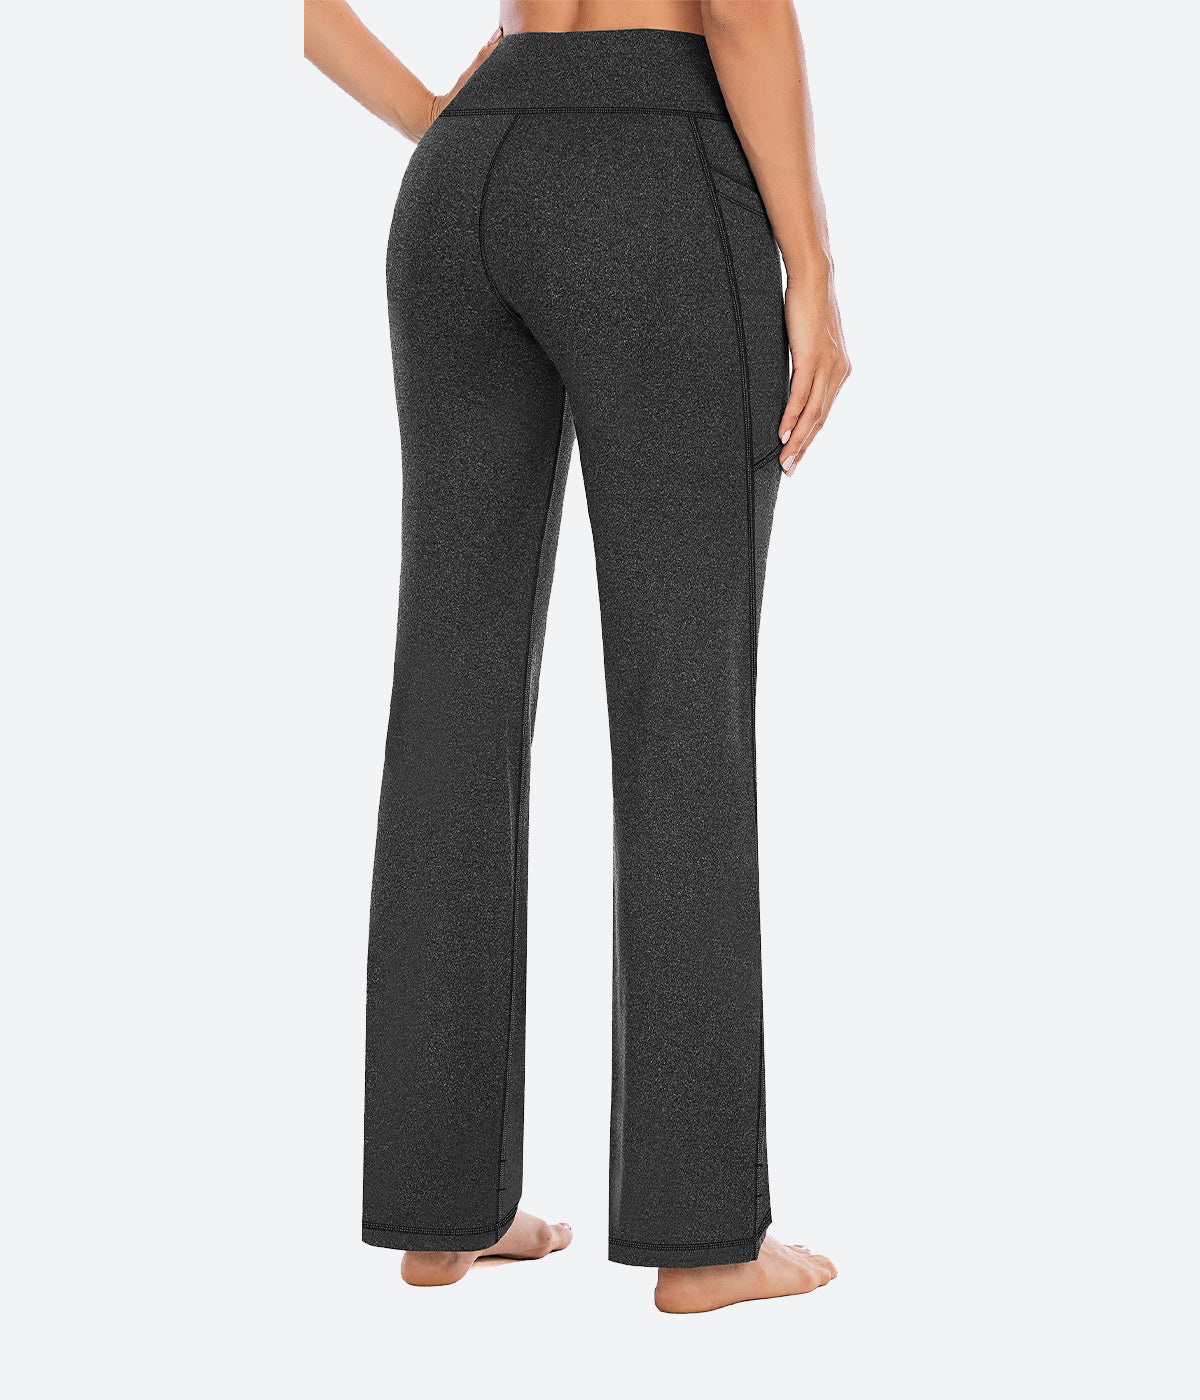 Heathyoga Bootcut Yoga Pants for Women with Pockets High